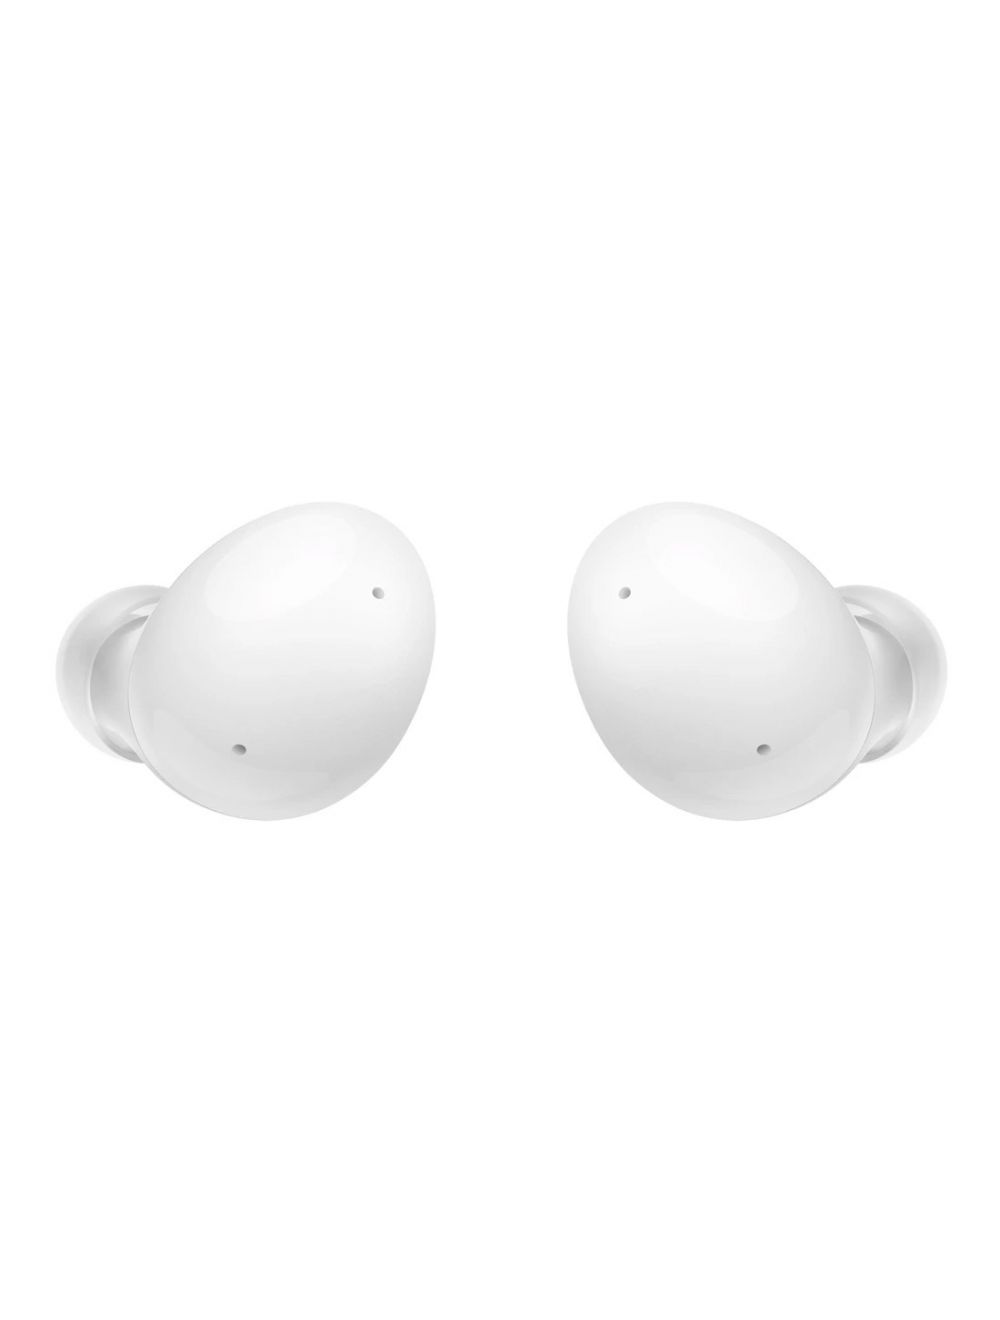 Samsung Galaxy Buds 2 Wireless Active Noise Cancelling Earbuds - White